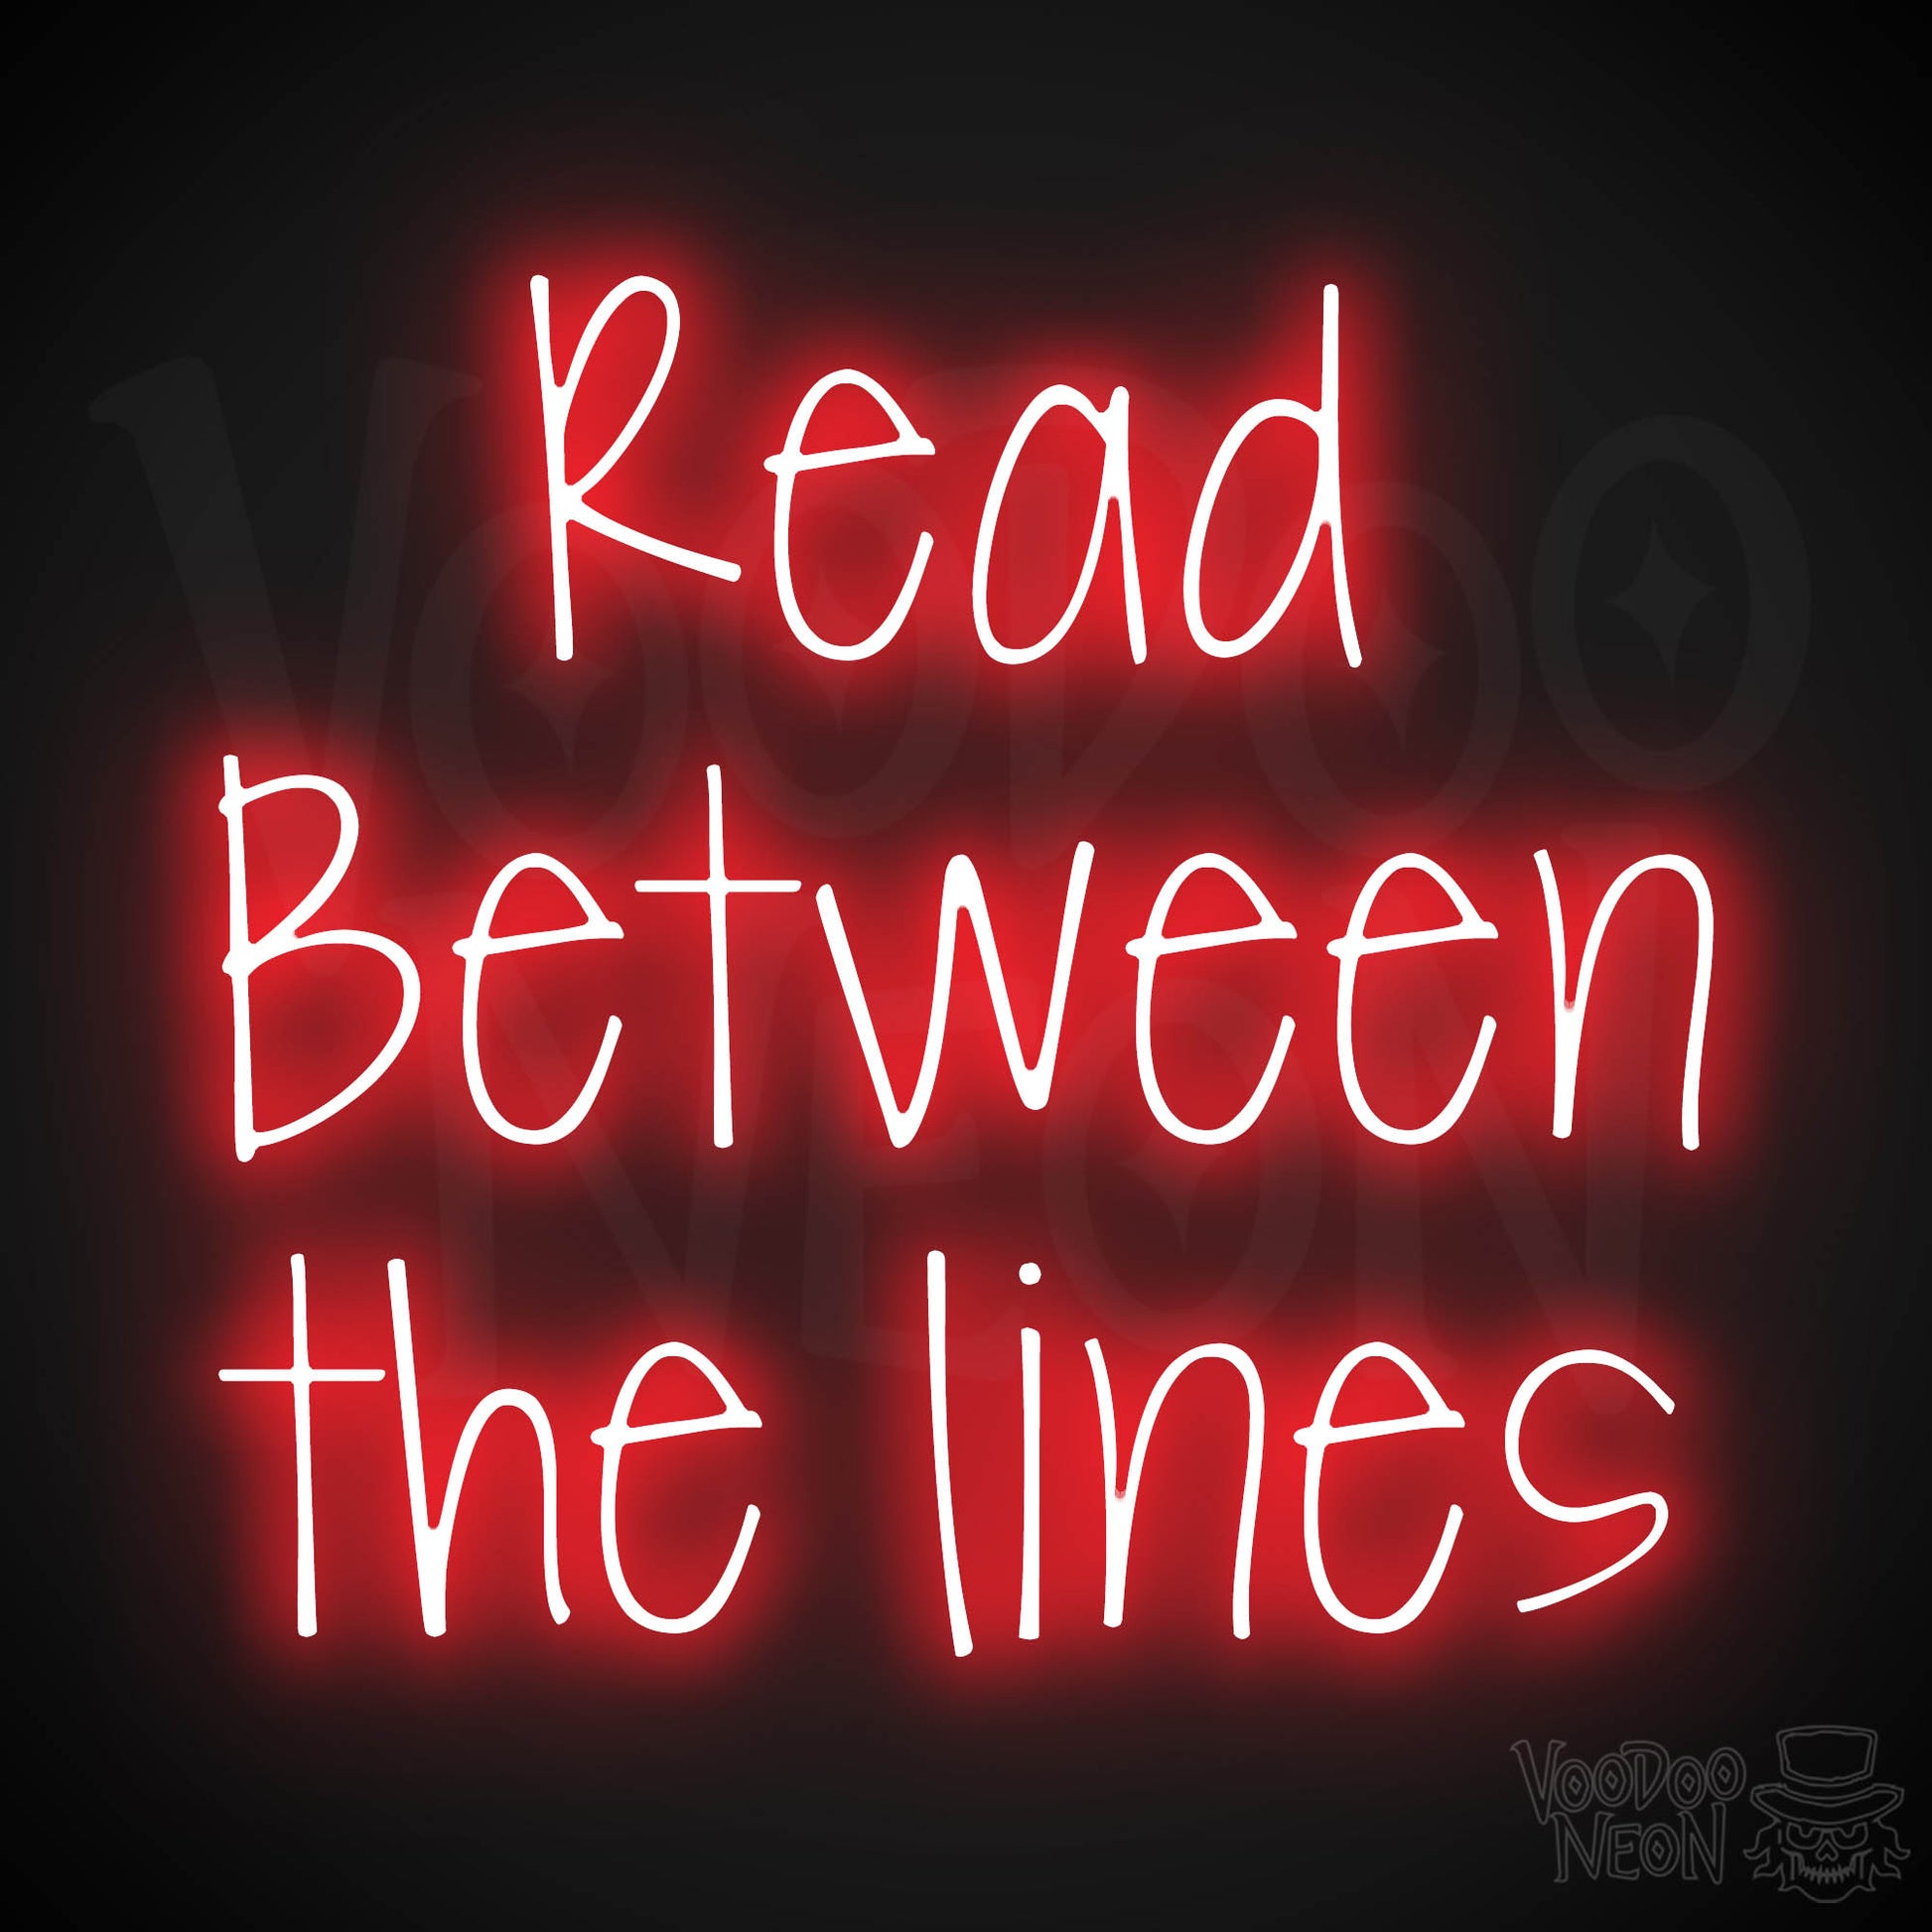 Read Between The Lines LED Neon - Red